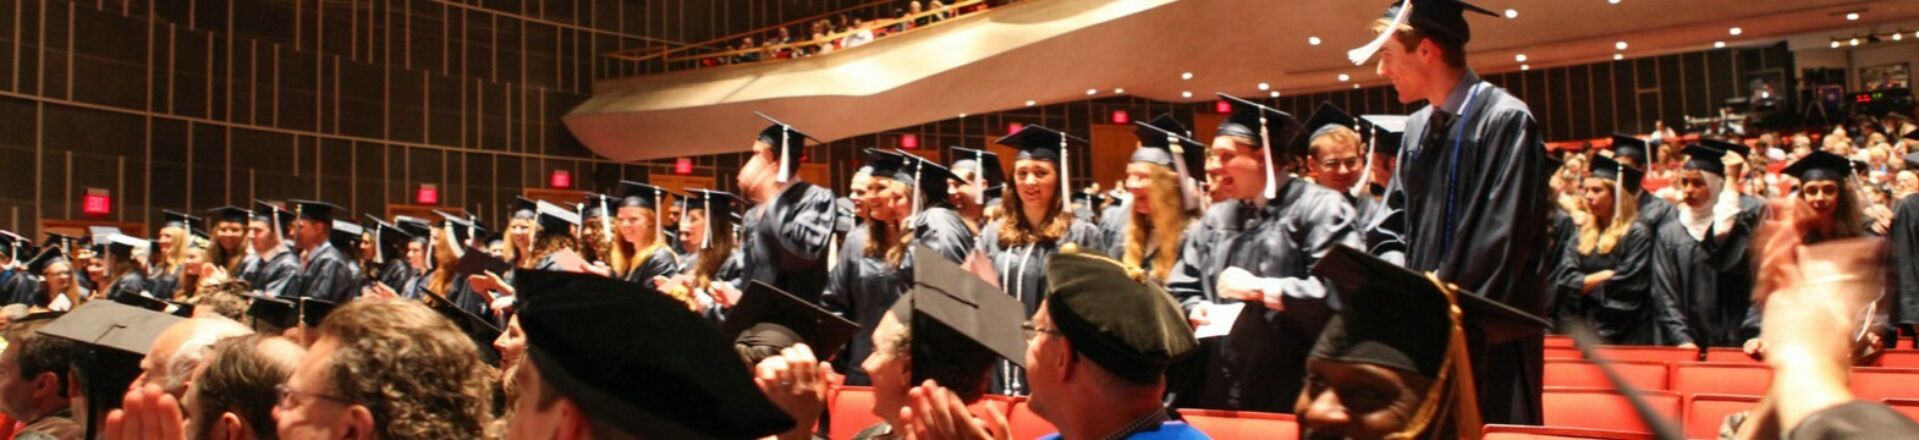 Students, family and friends gathered inside Eisenhower Auditorium to celebrate graduation commencement.